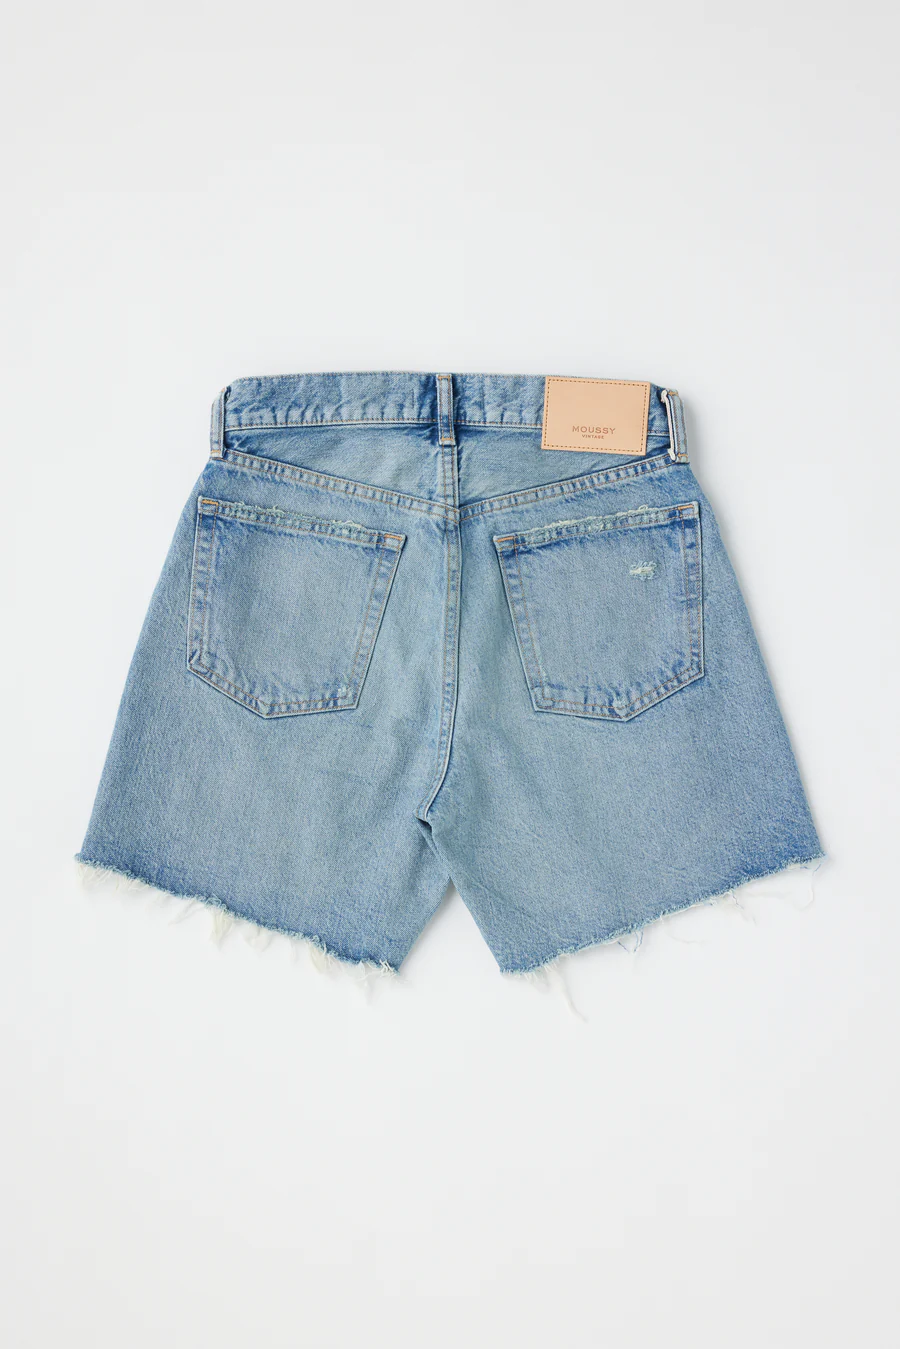 MV GRATERFORD SHORTS IN BLUE - Romi Boutique